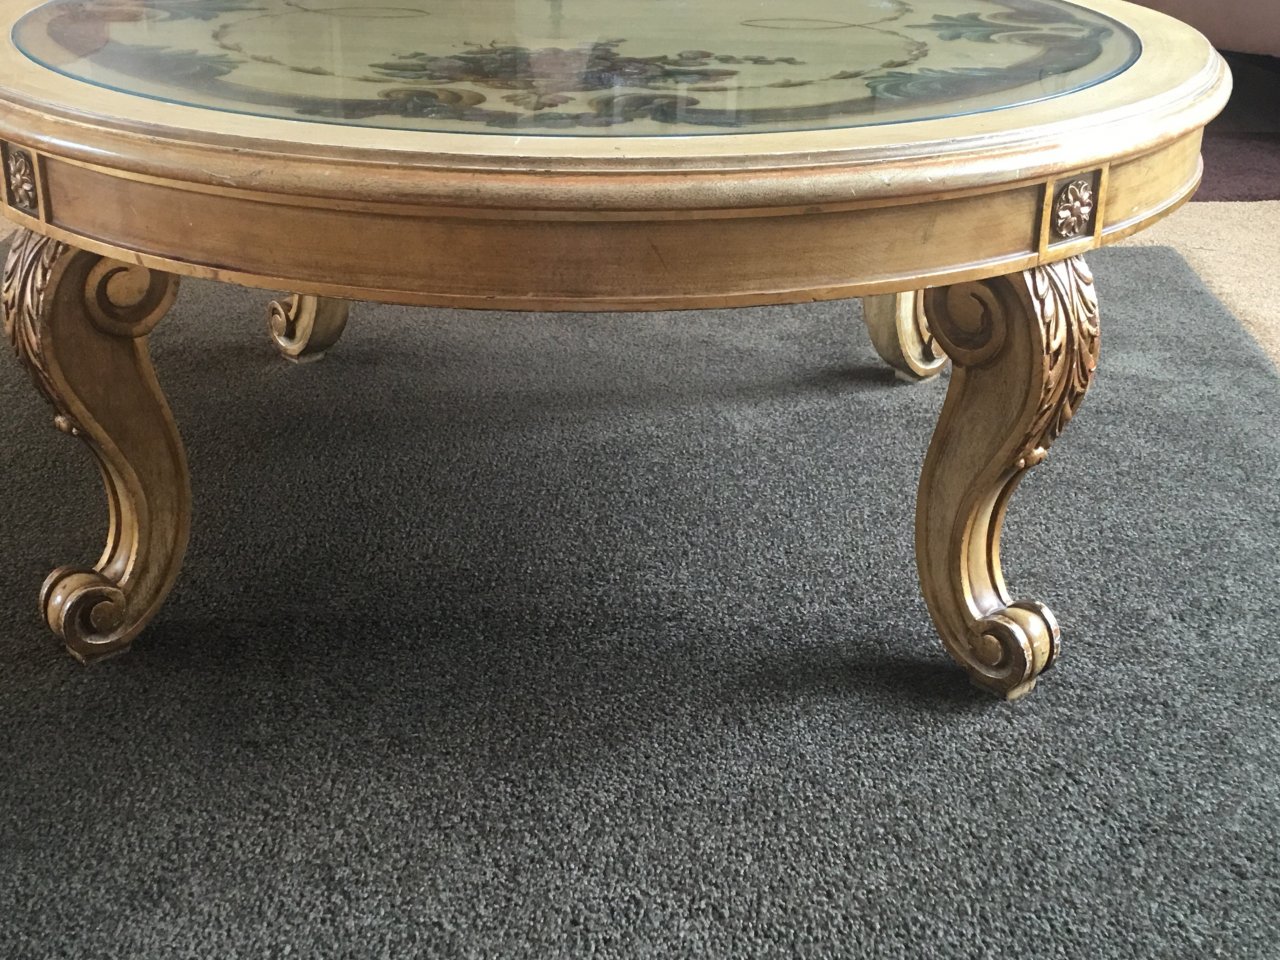 Round Coffee Table | My Antique Furniture Collection